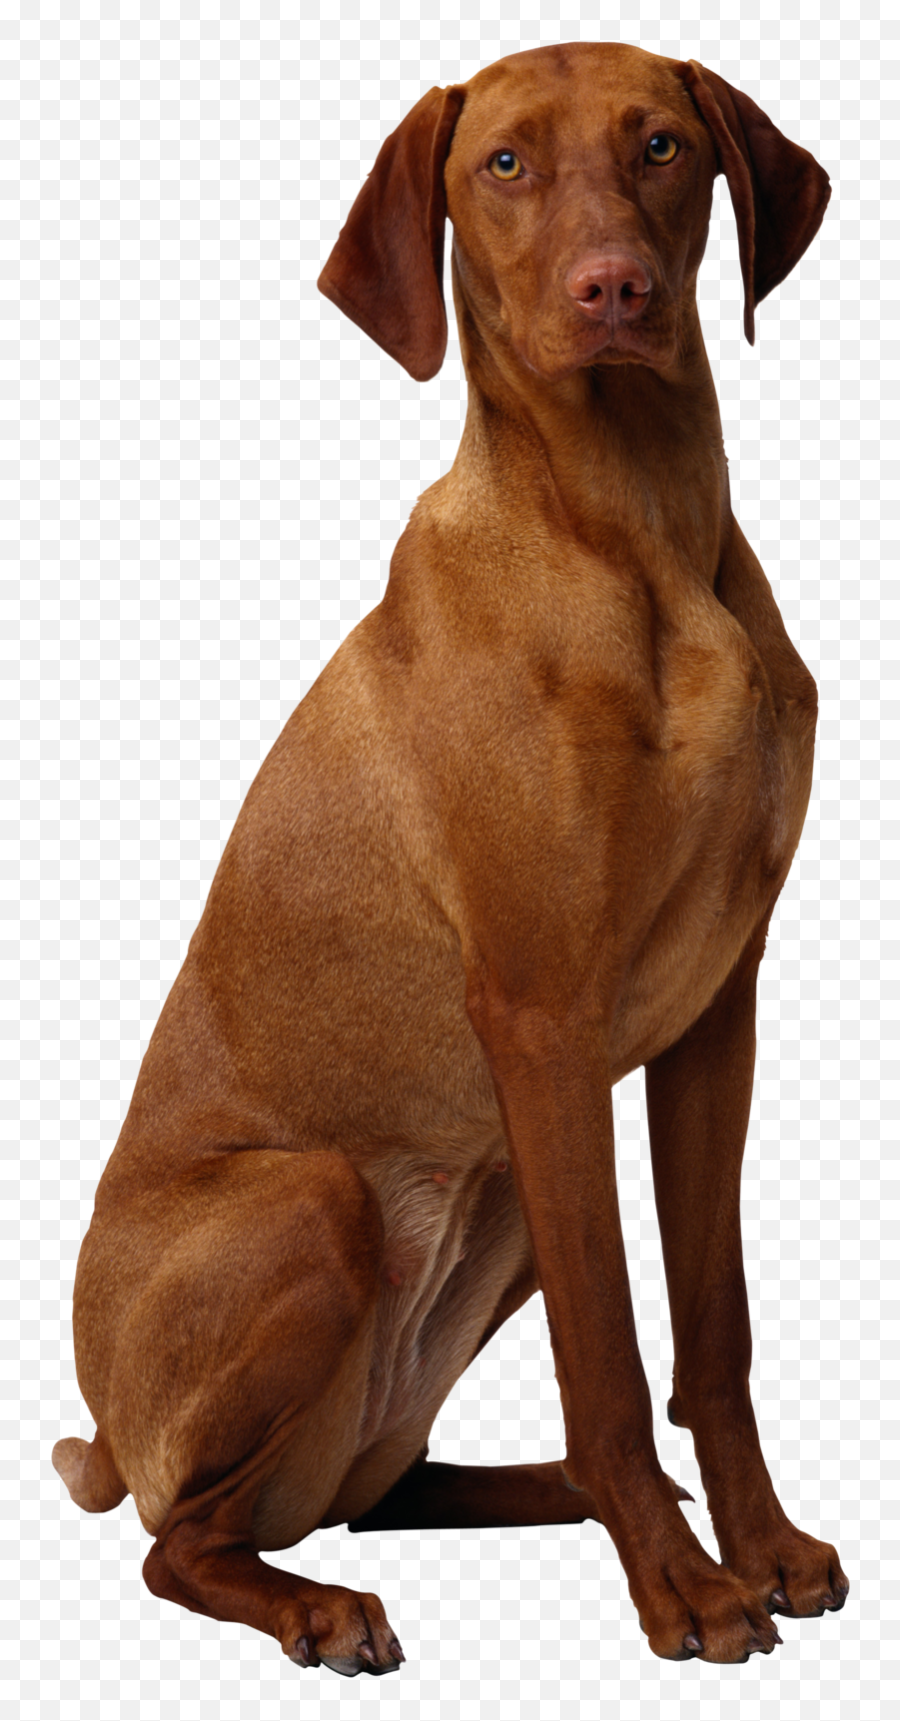 Download Free Png Background - Dogsdogtransparent Dlpngcom Dogs,Dogs Transparent Background